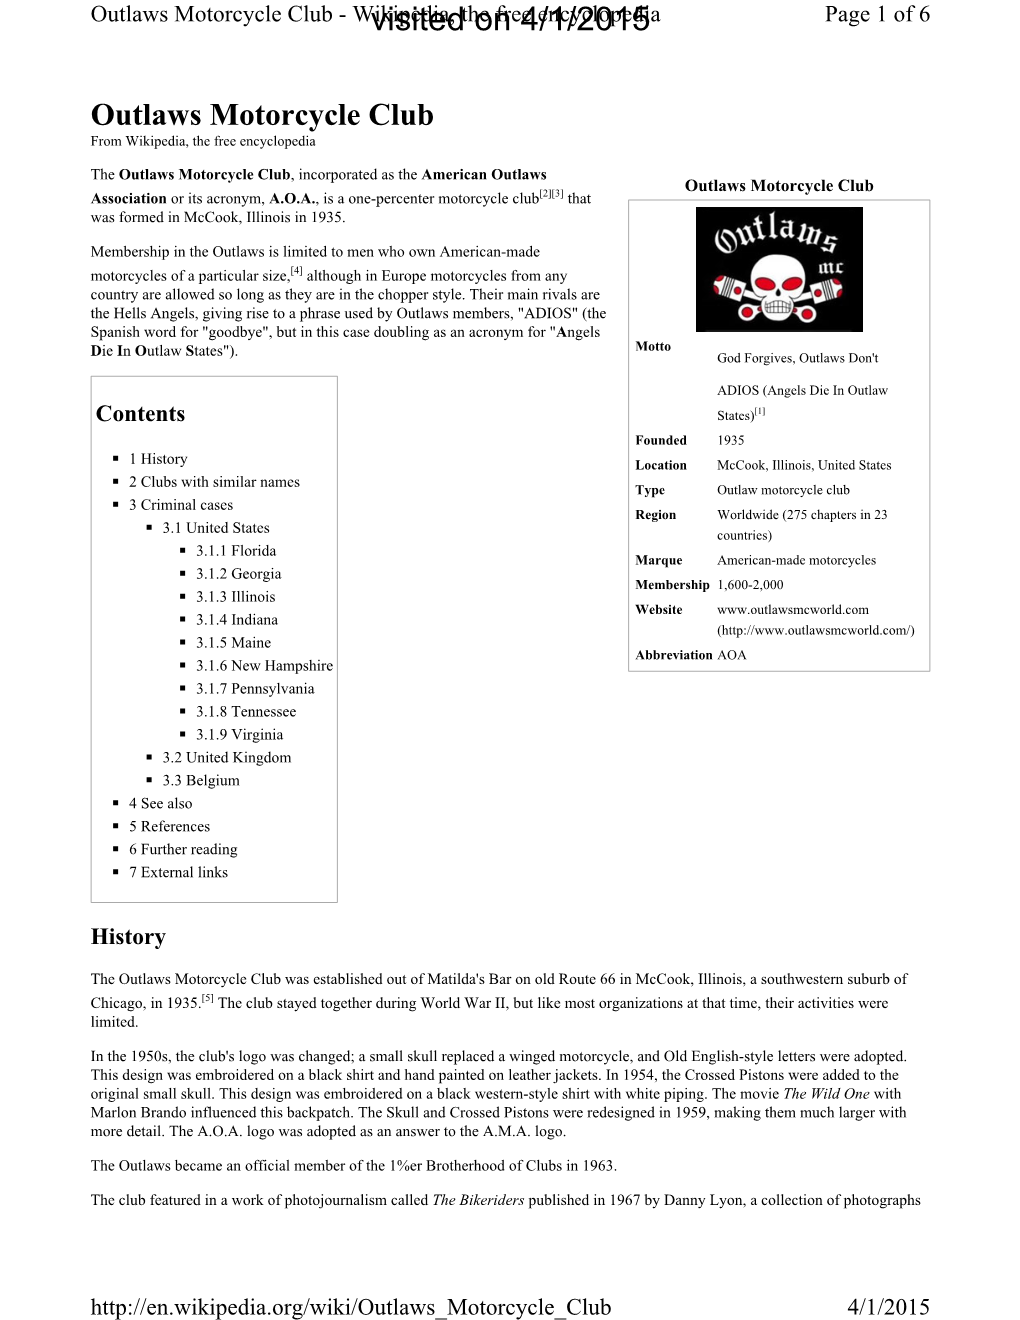 Outlaws Motorcycle Club - Wikvisitedipedia, the on Free 4/1/2015 Encyclopedia Page 1 of 6